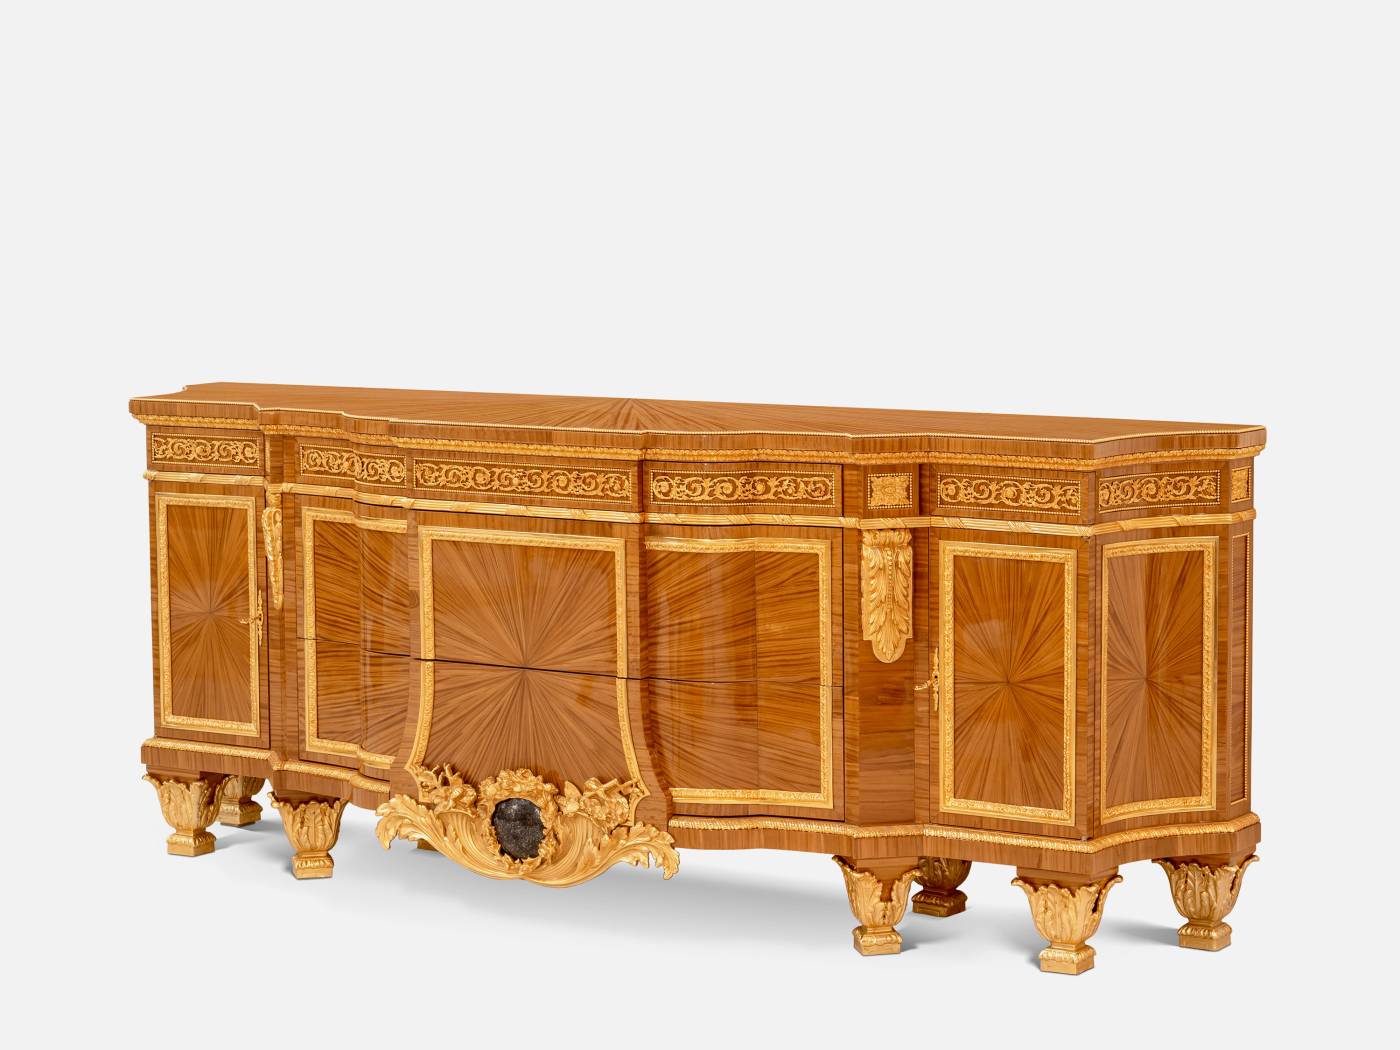 ART. 2298 - C.G. Capelletti quality furniture with made in Italy contemporary Sideboards